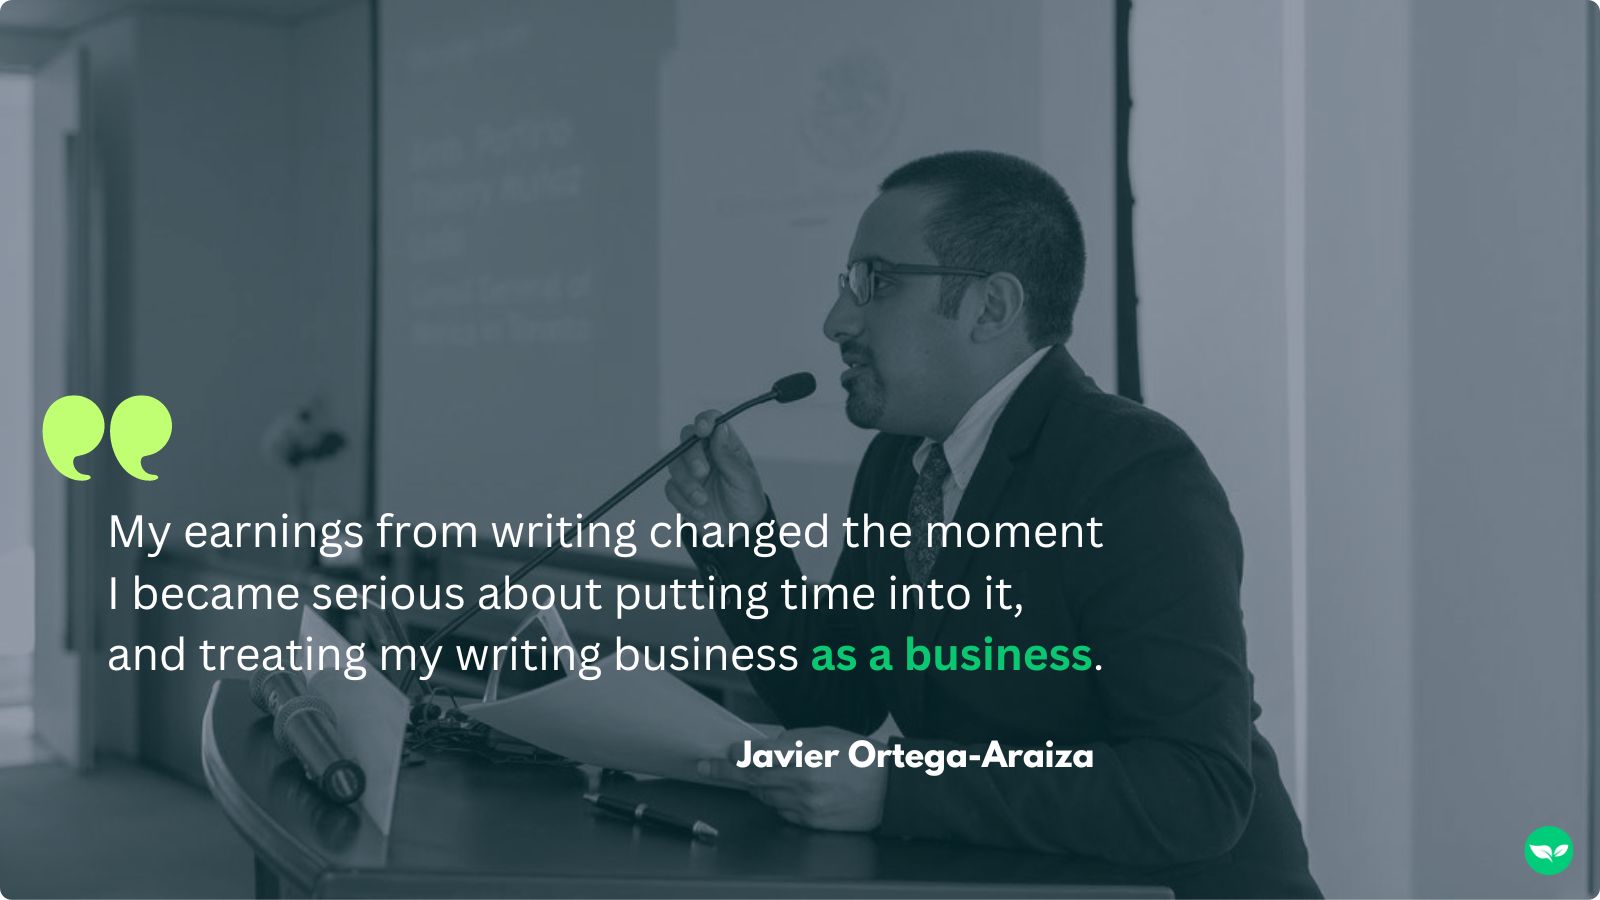 A quote from Javier "My earnings from writing changed the moment I became serious about putting time into it, and treating my writing business as a business"